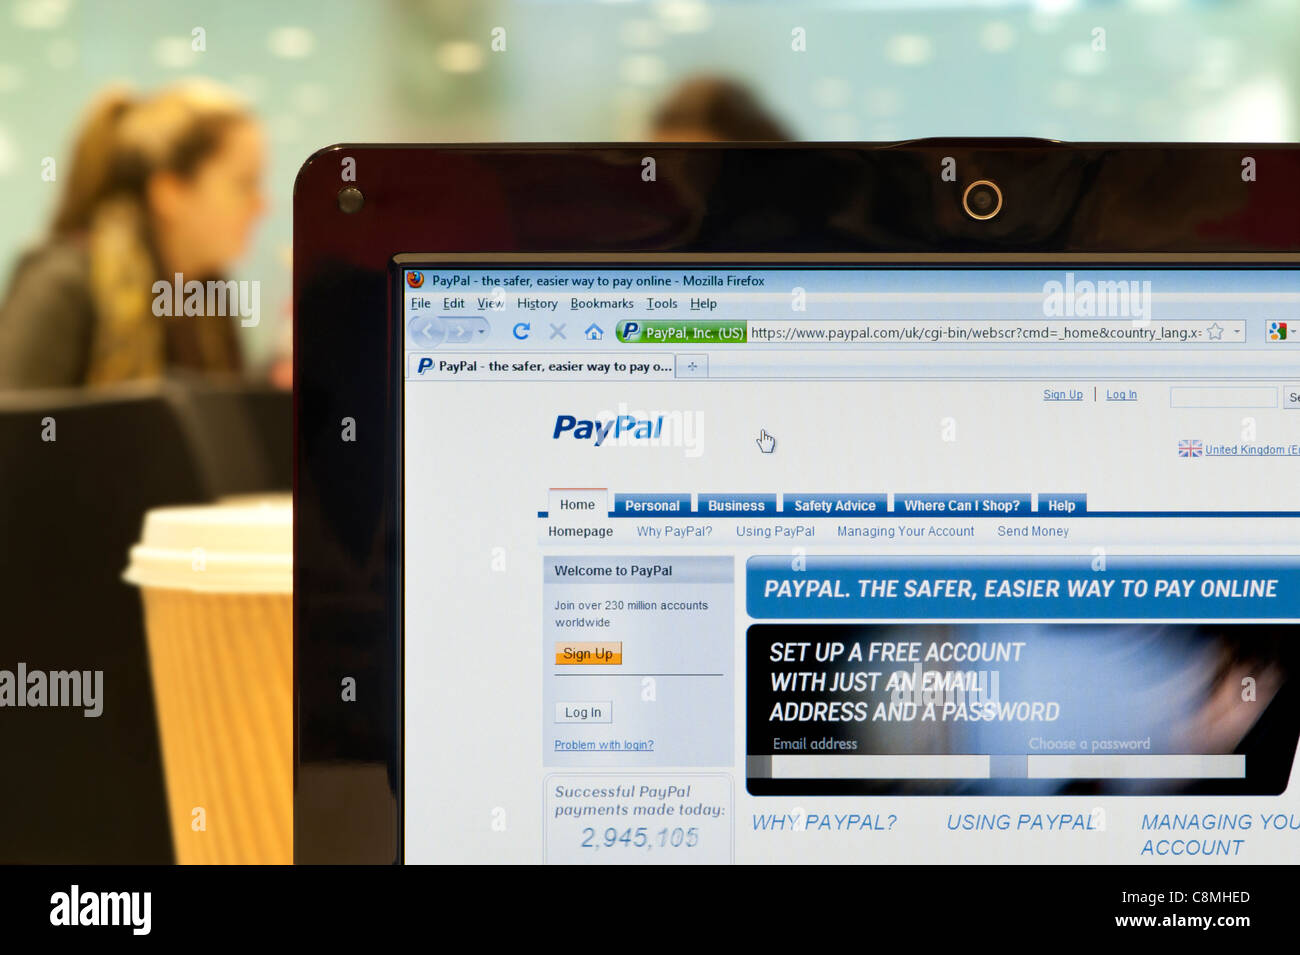 The PayPal website shot in a coffee shop environment (Editorial use only: print, TV, e-book and editorial website). Stock Photo